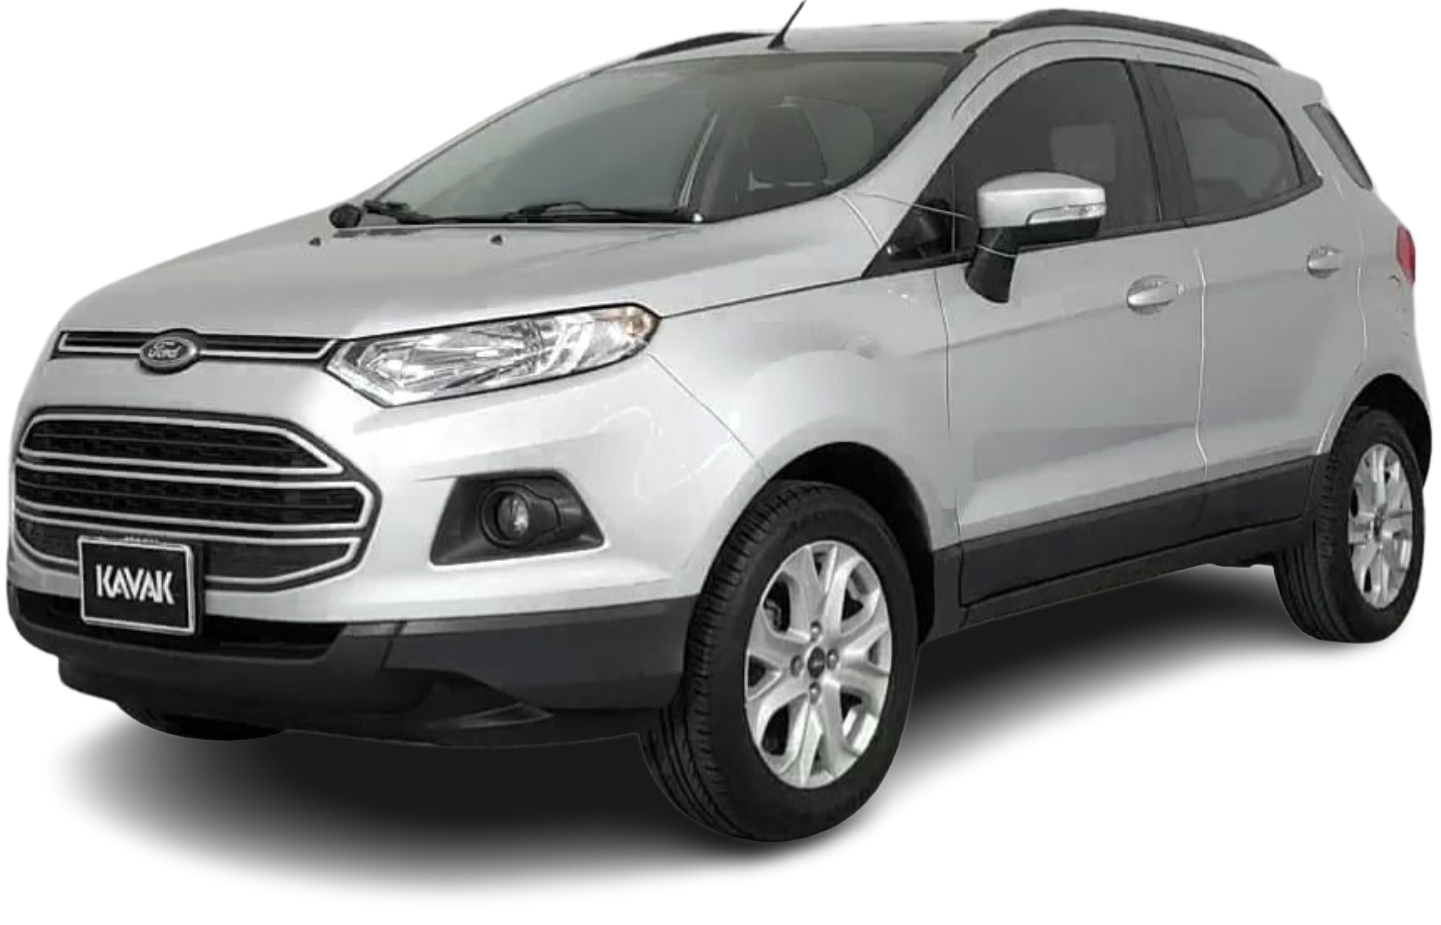 Ford Eco Sport SUV 2017 2016 2015 2014 2013